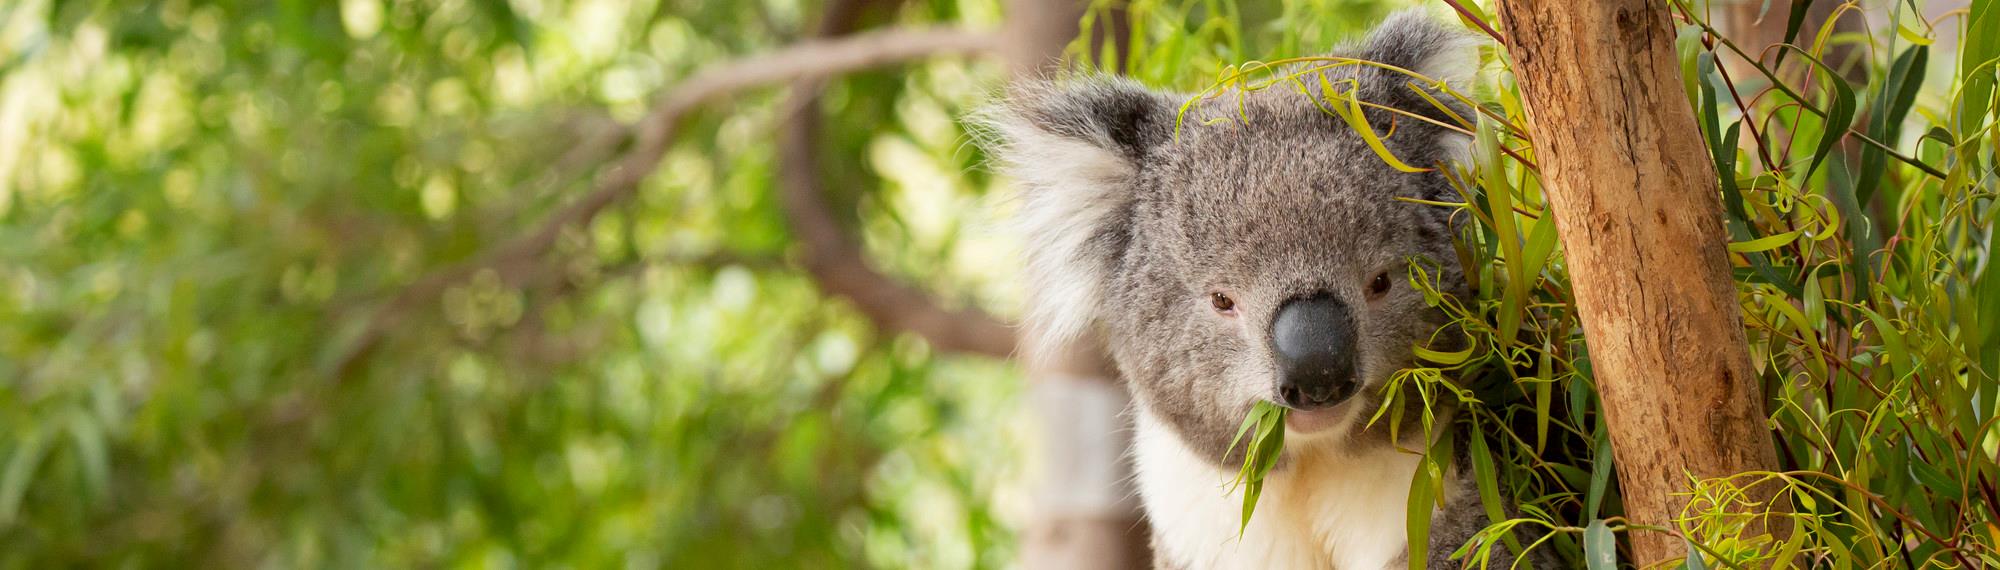 A Koala hanging in a tree, eating leaves.